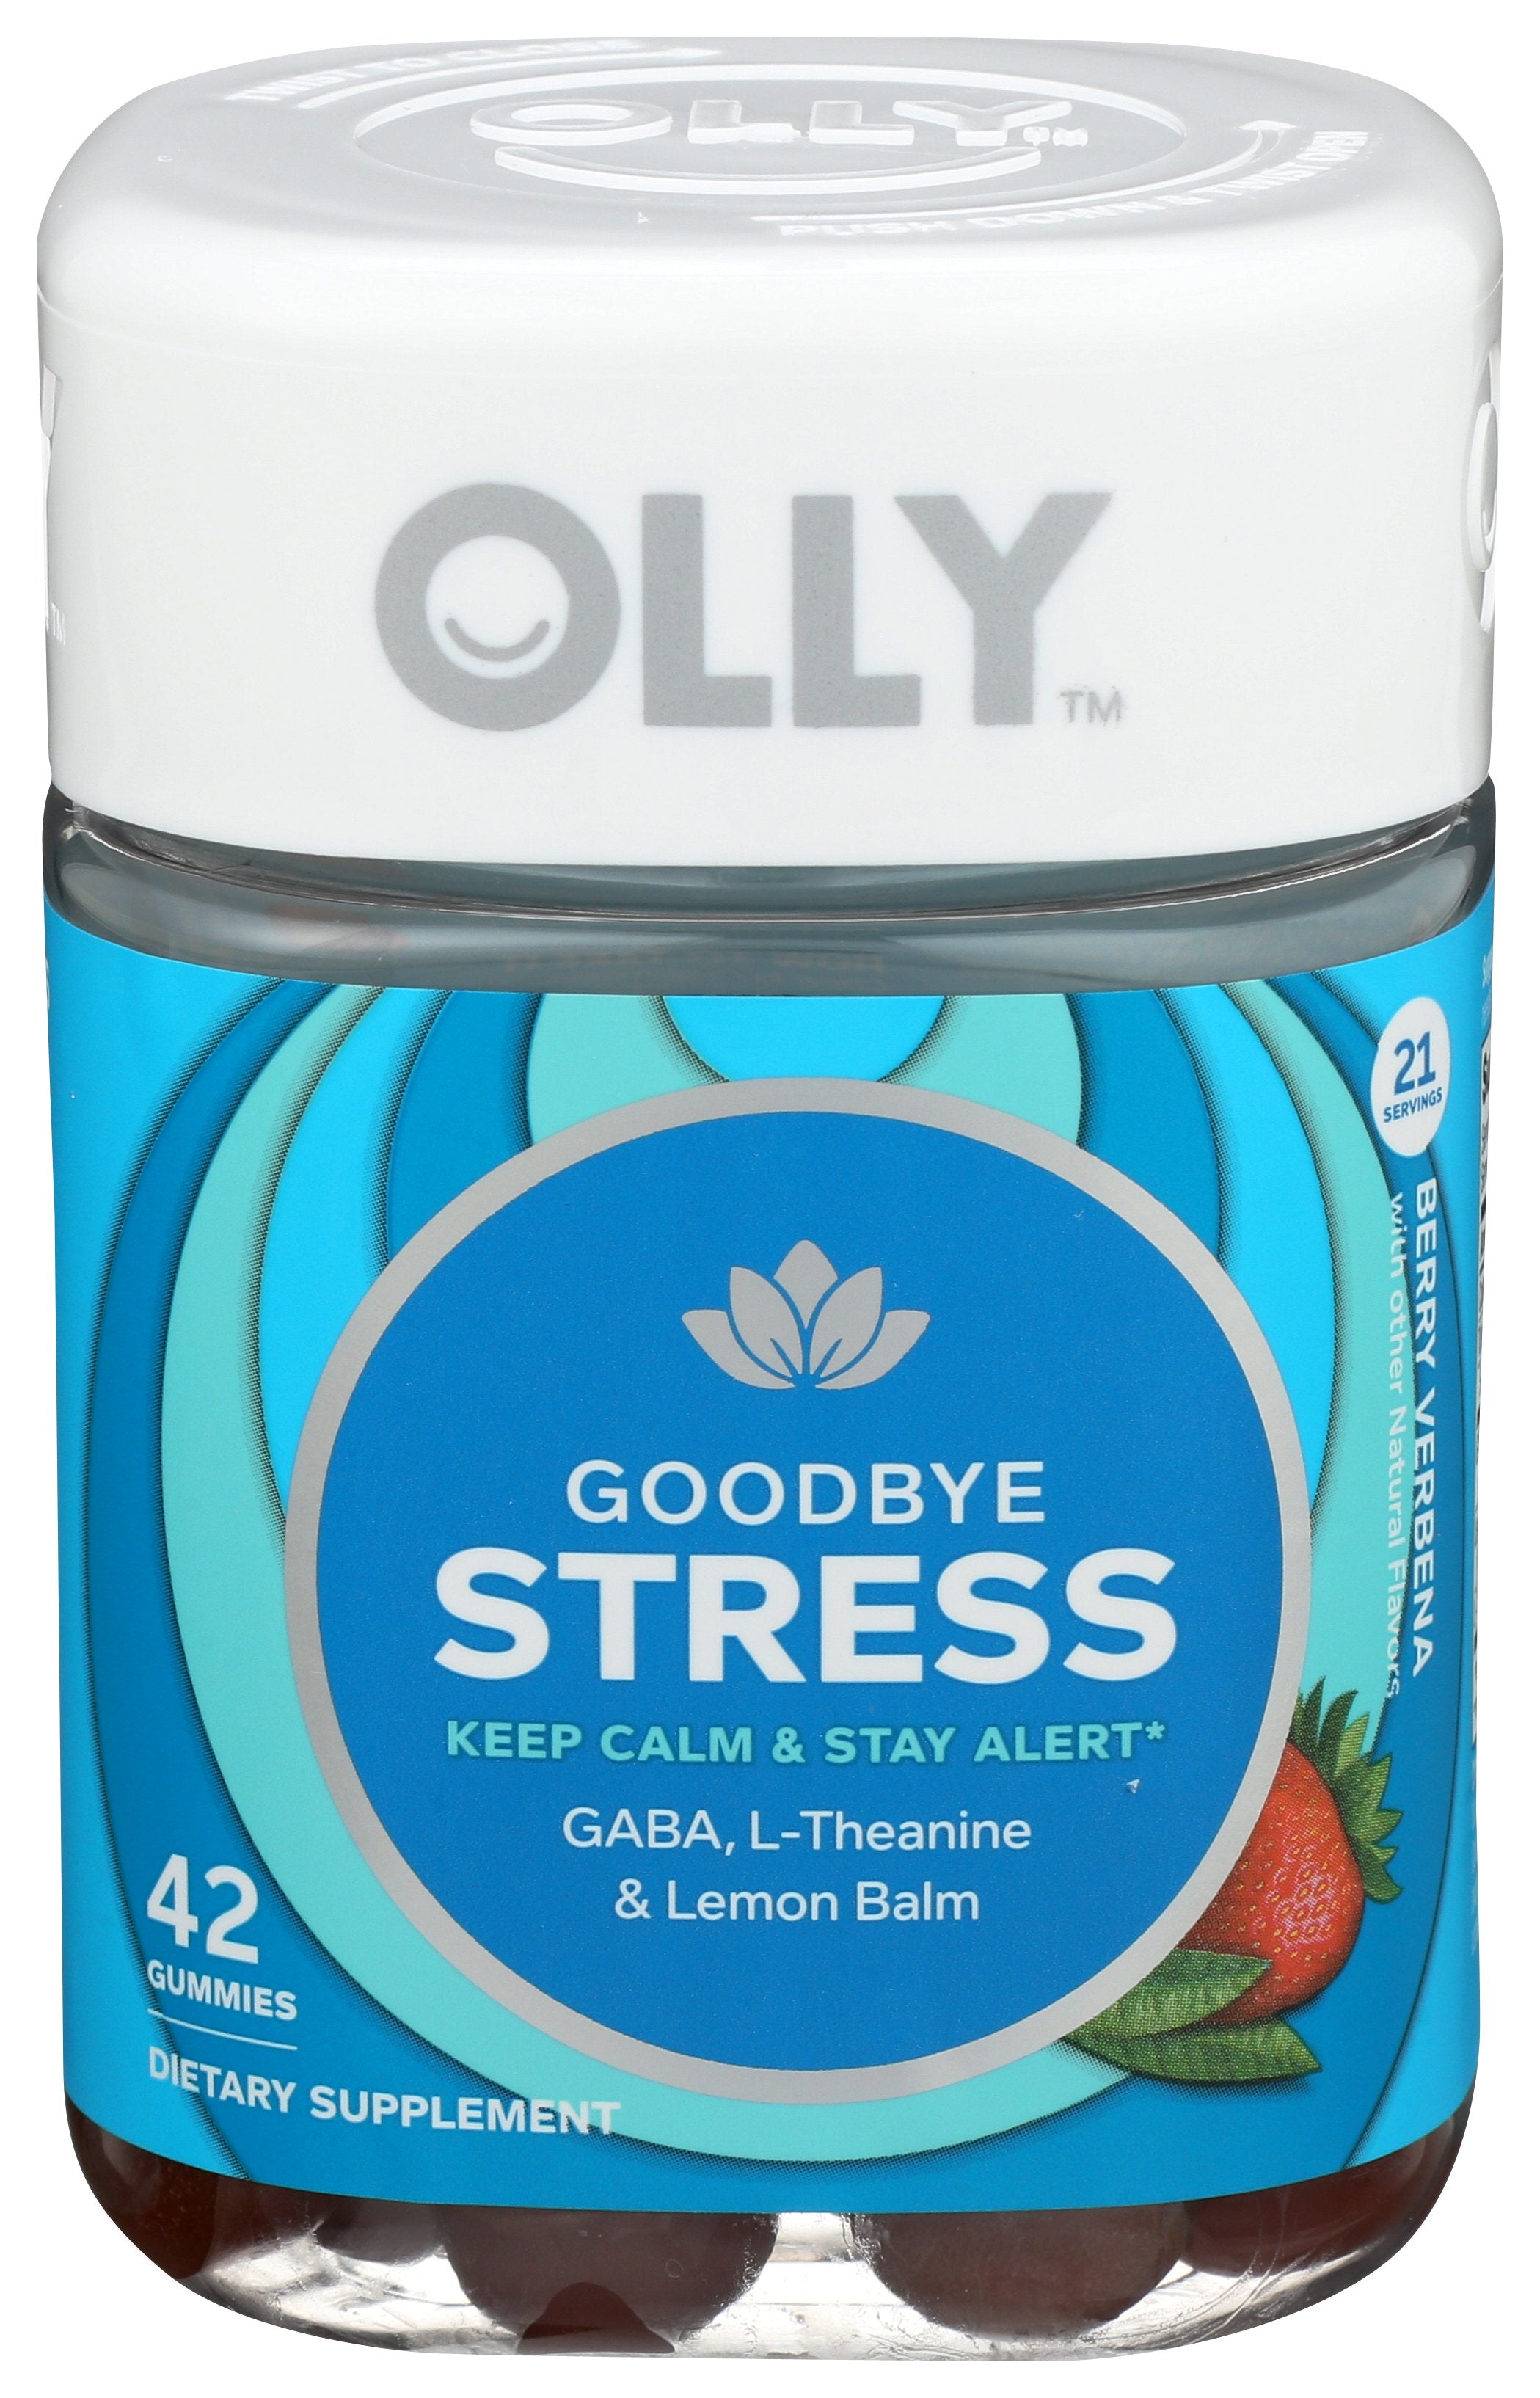 OLLY SUPPLEMENT GOODBYE STRESS - Case of 3